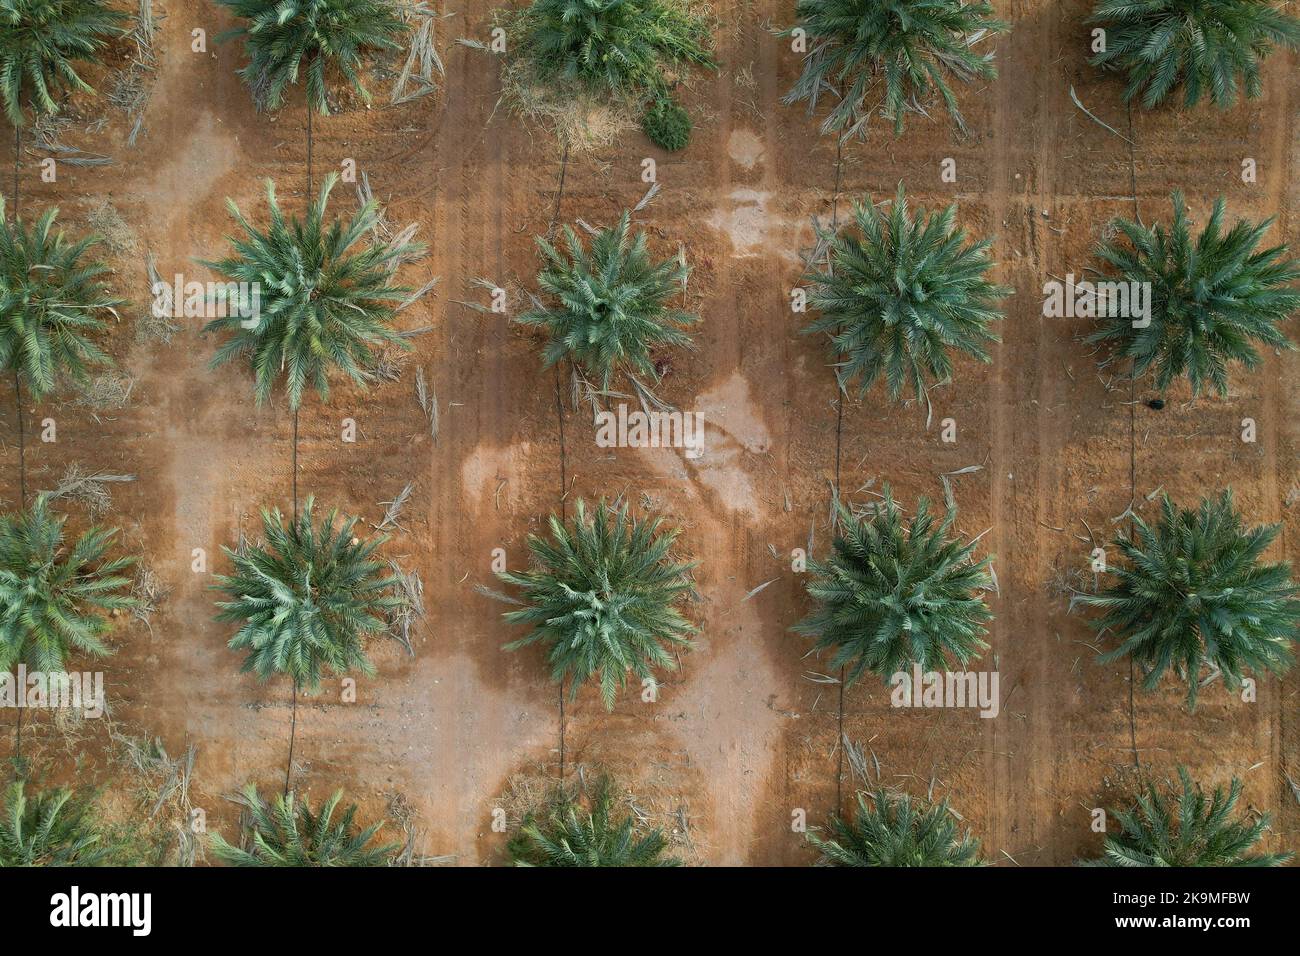 Top view of a large date Palms plantation in the desert. Stock Photo